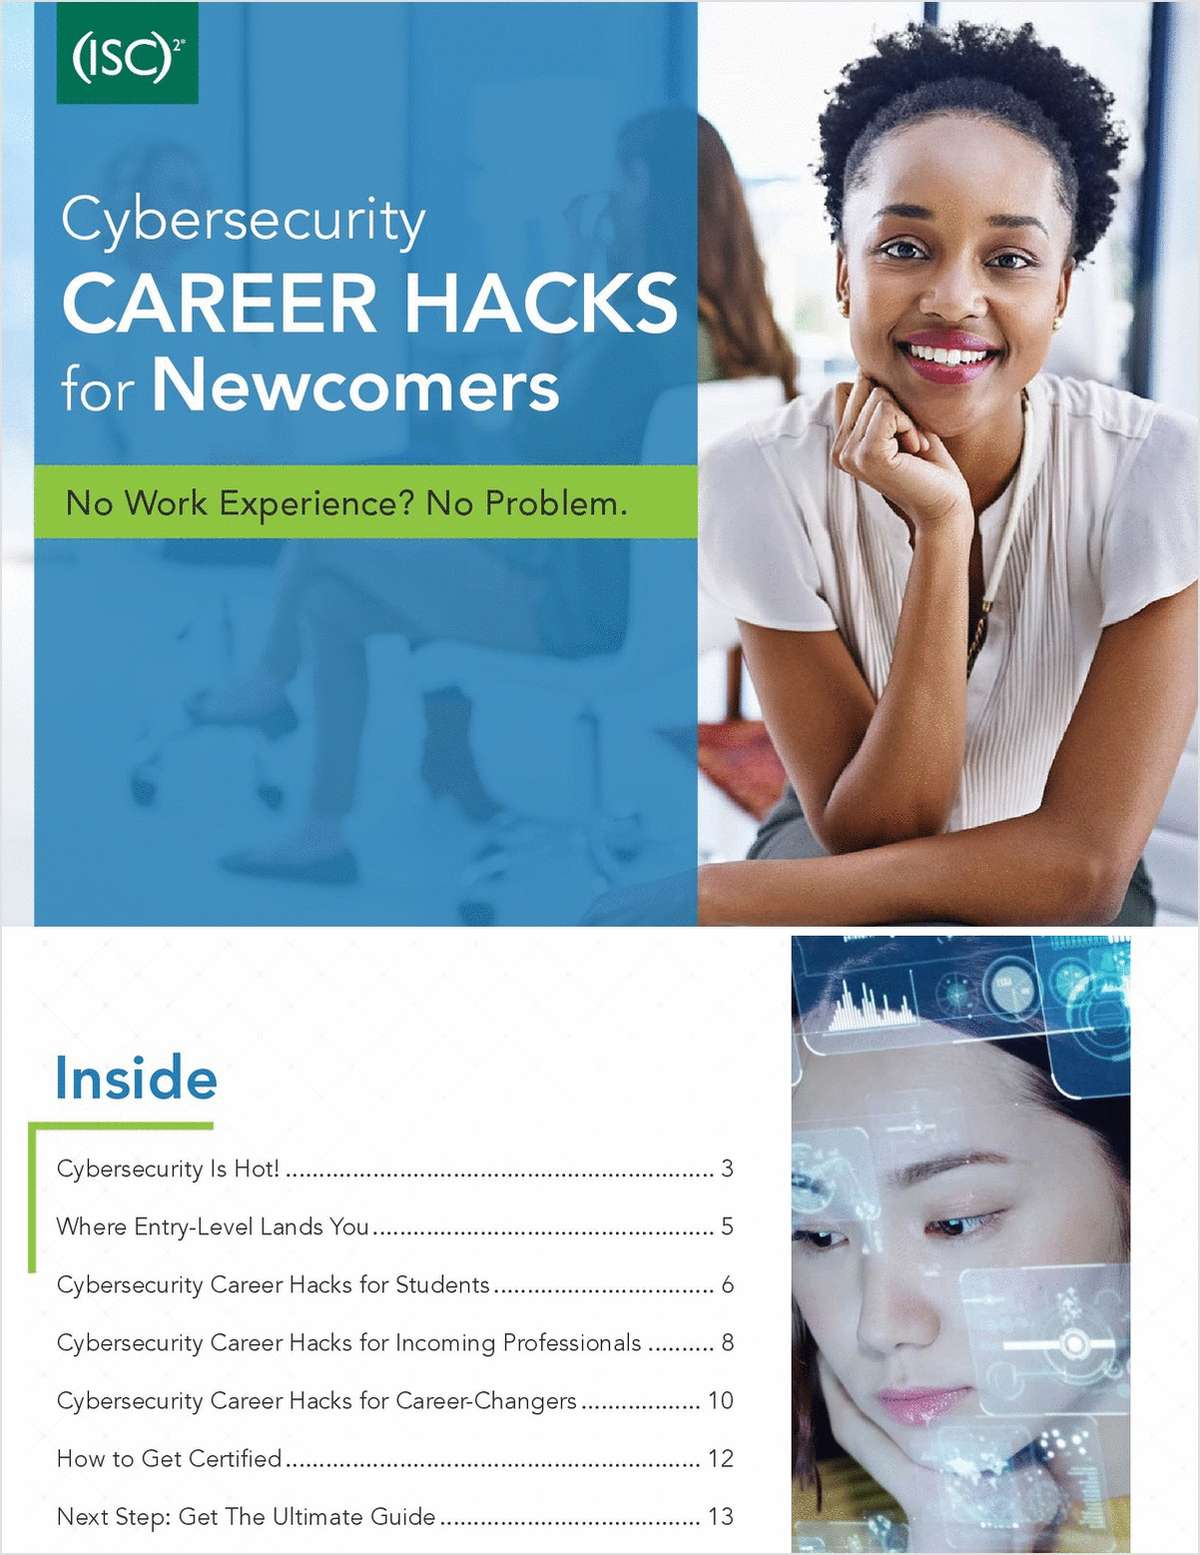 Cybersecurity Career Hacks for Newcomers